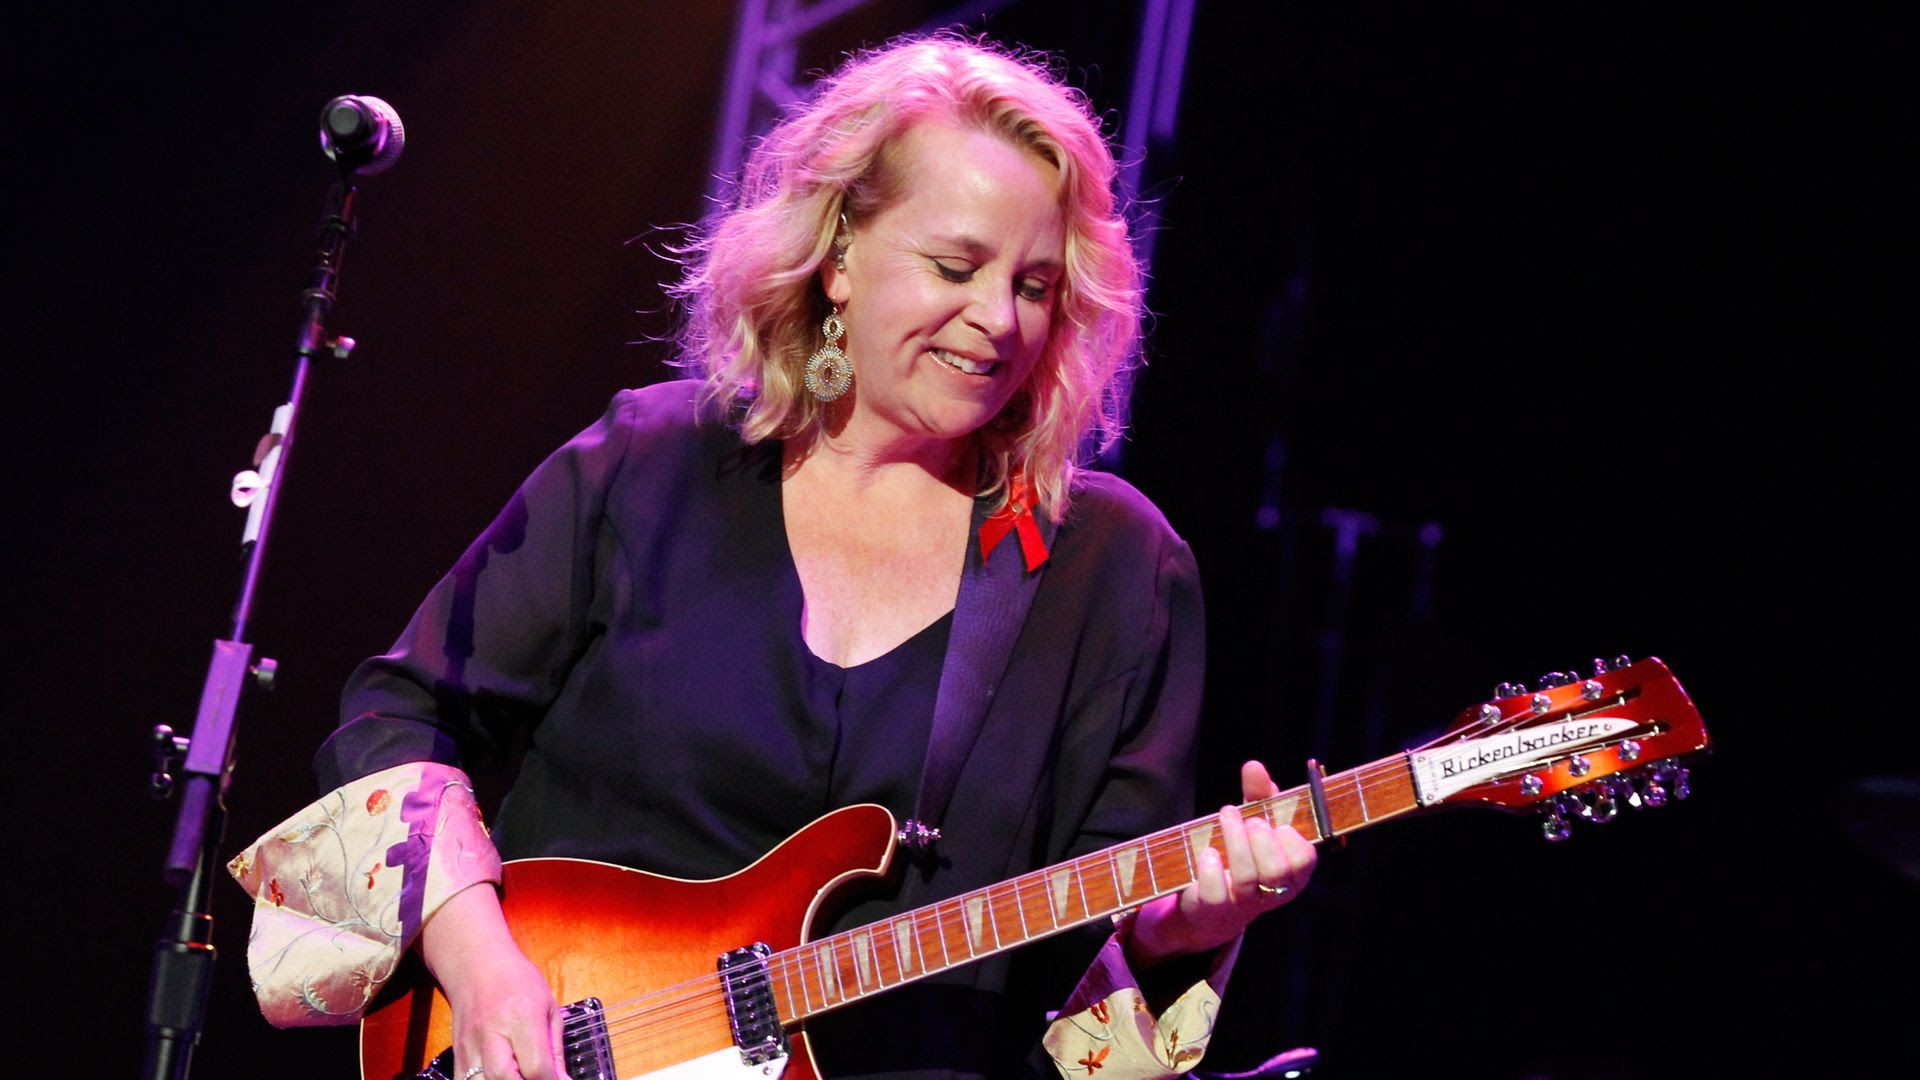 Mary Chapin Carpenter on stage holding a guitar